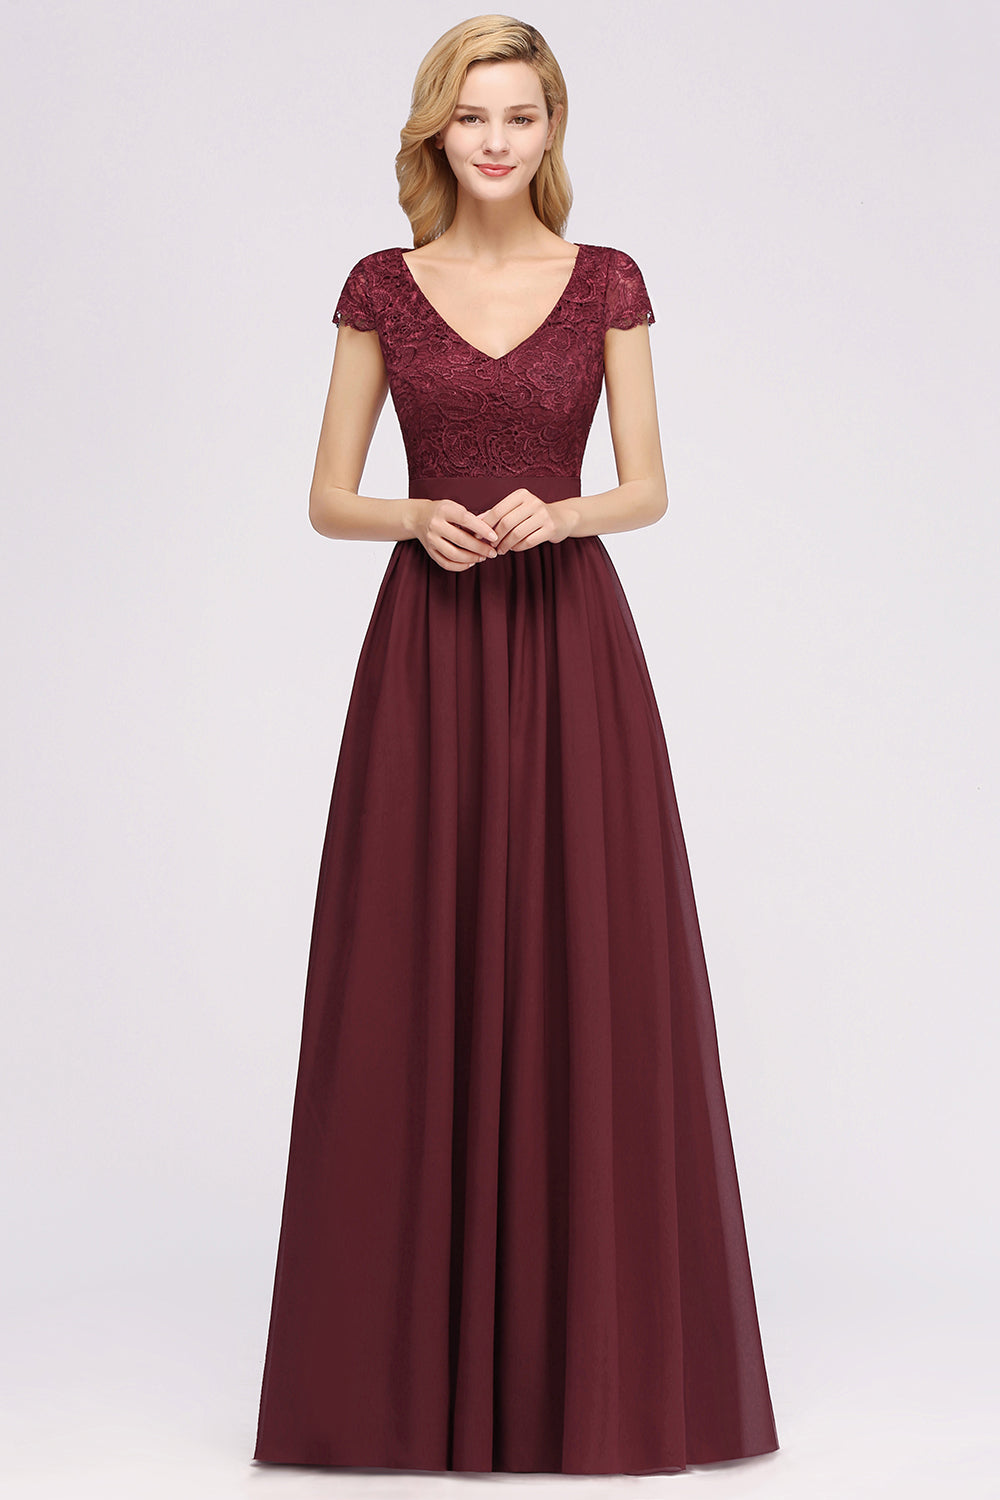 Load image into Gallery viewer, A-line Chiffon Lace V-Neck Sleeveless Long Bridesmaid Dresses with Ruffles-BIZTUNNEL
